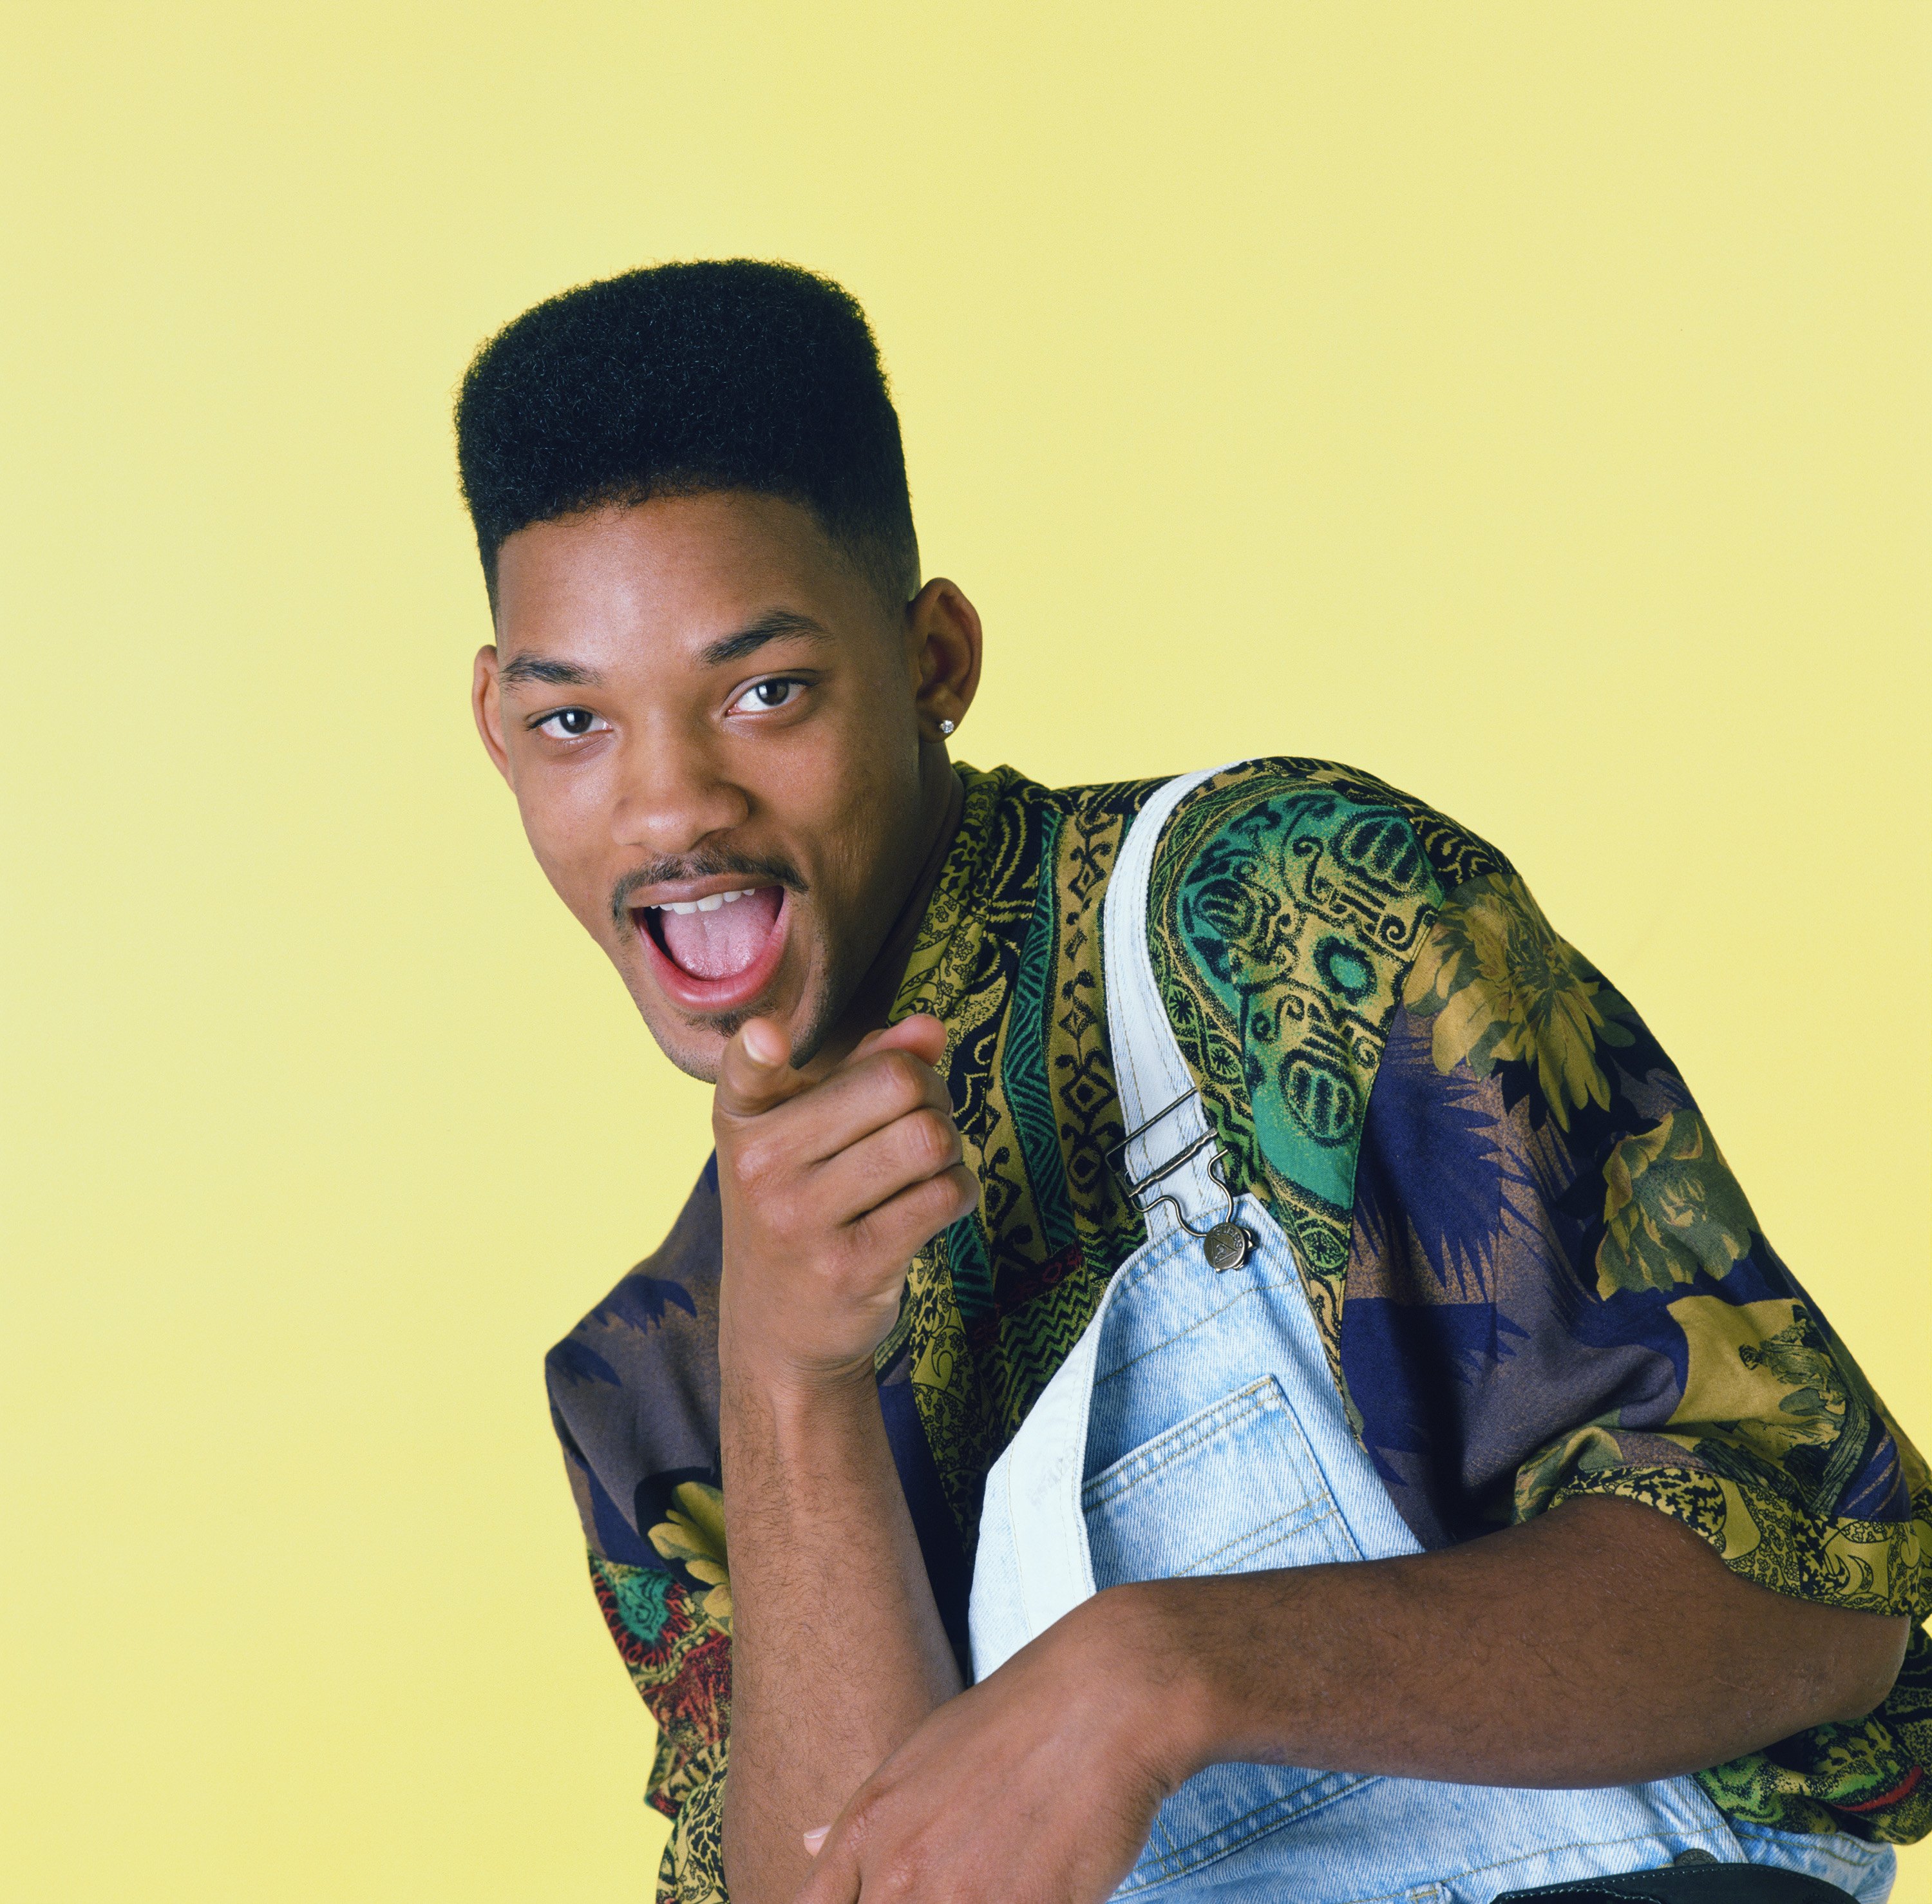 Will Smith in front of a yellow background